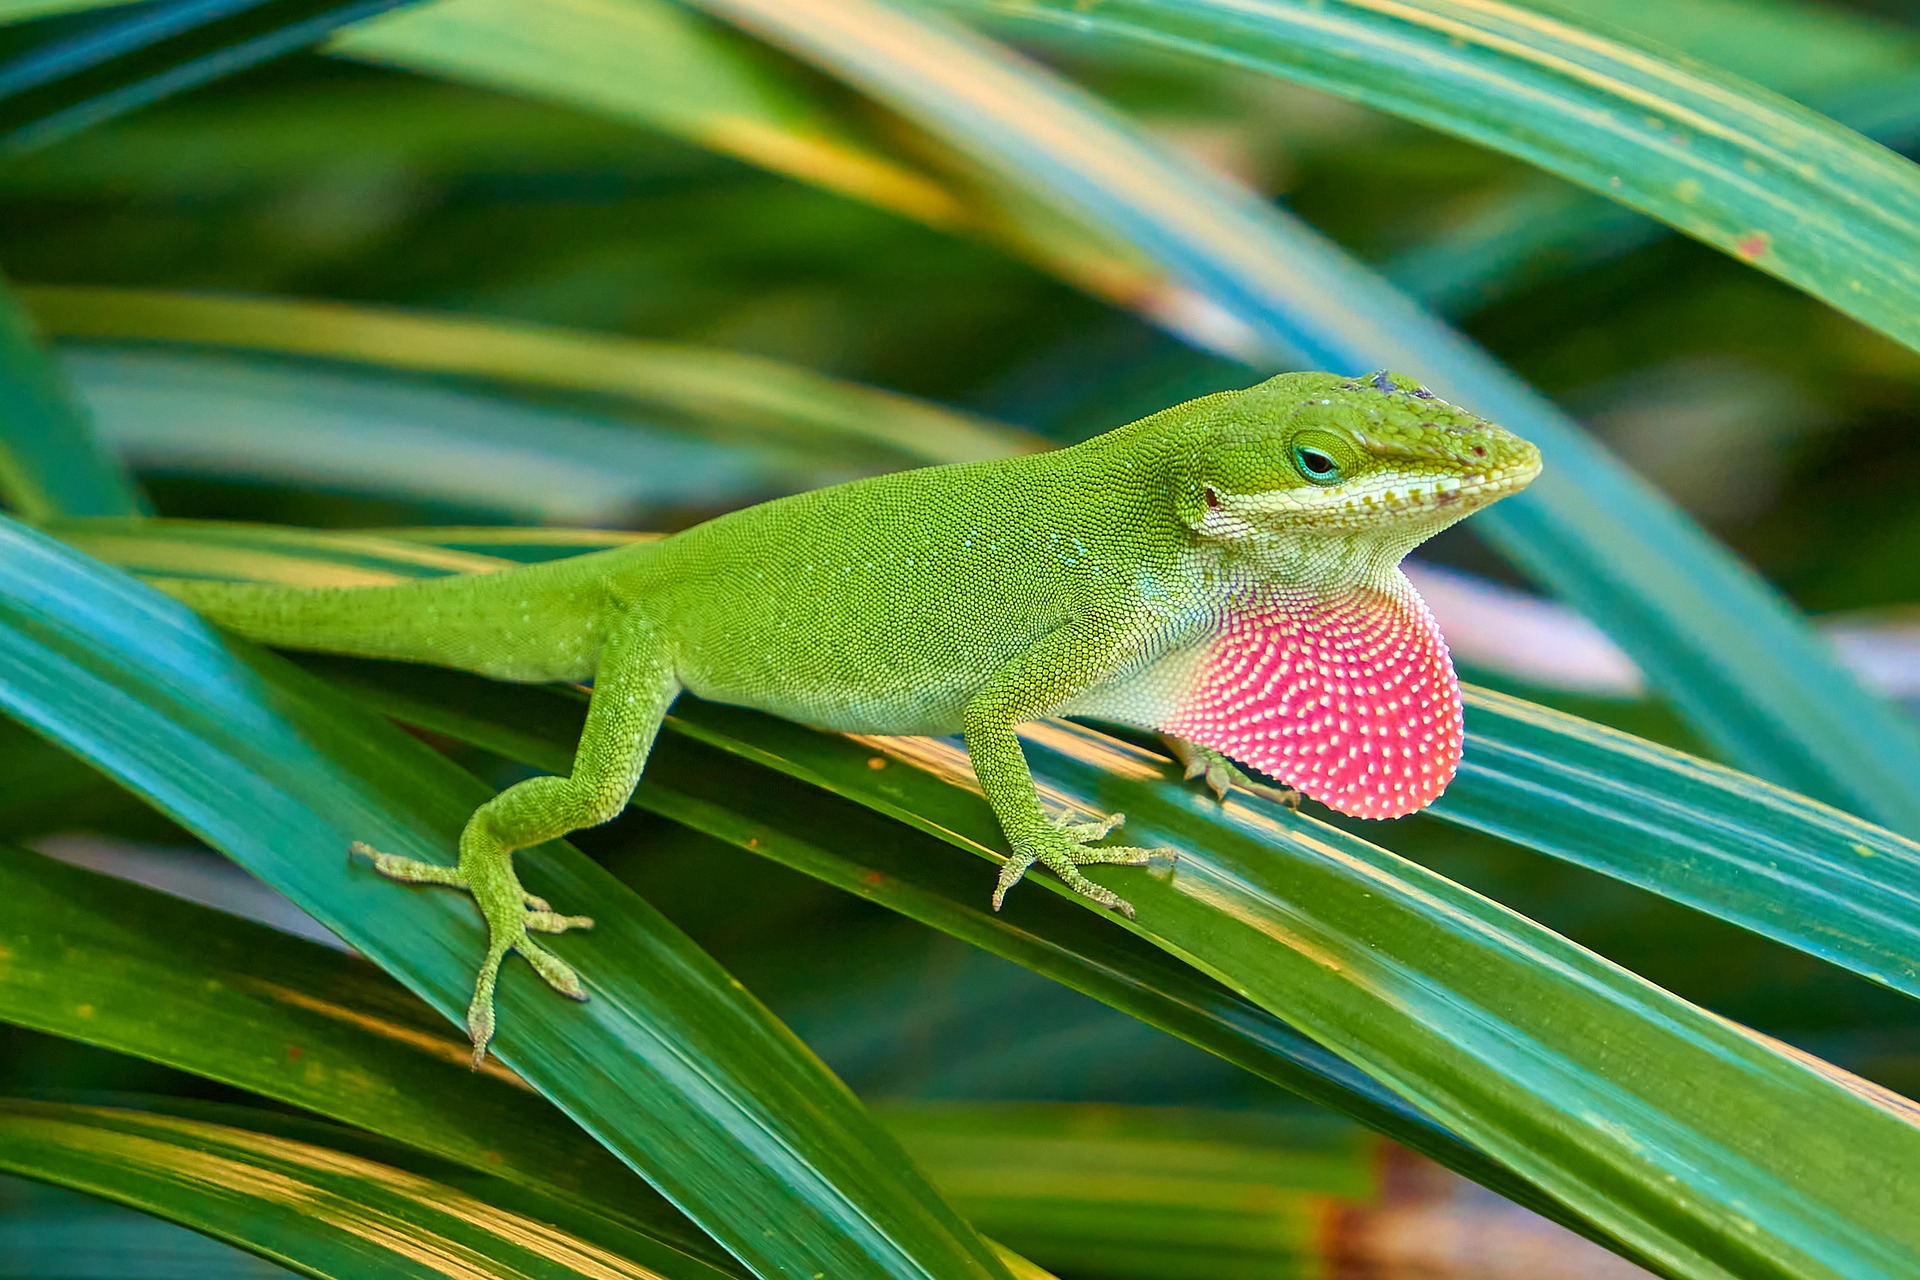 Leapin' Lizards: The Green Anole, Explained